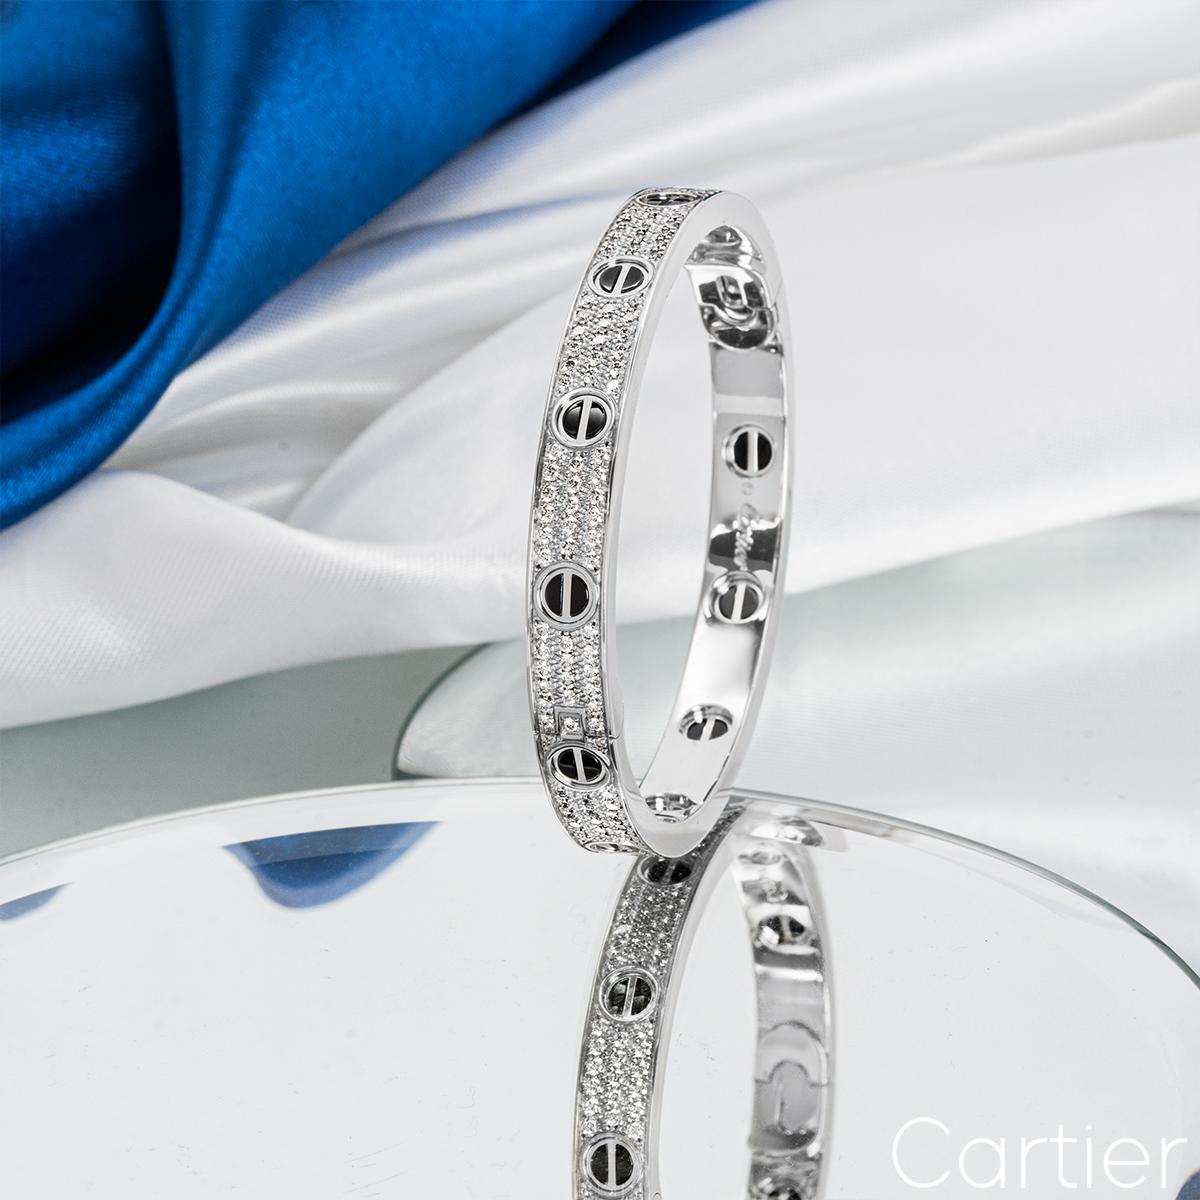 Cartier White Gold Pave Diamond & Ceramic Love Bracelet N6032417 In Excellent Condition For Sale In London, GB